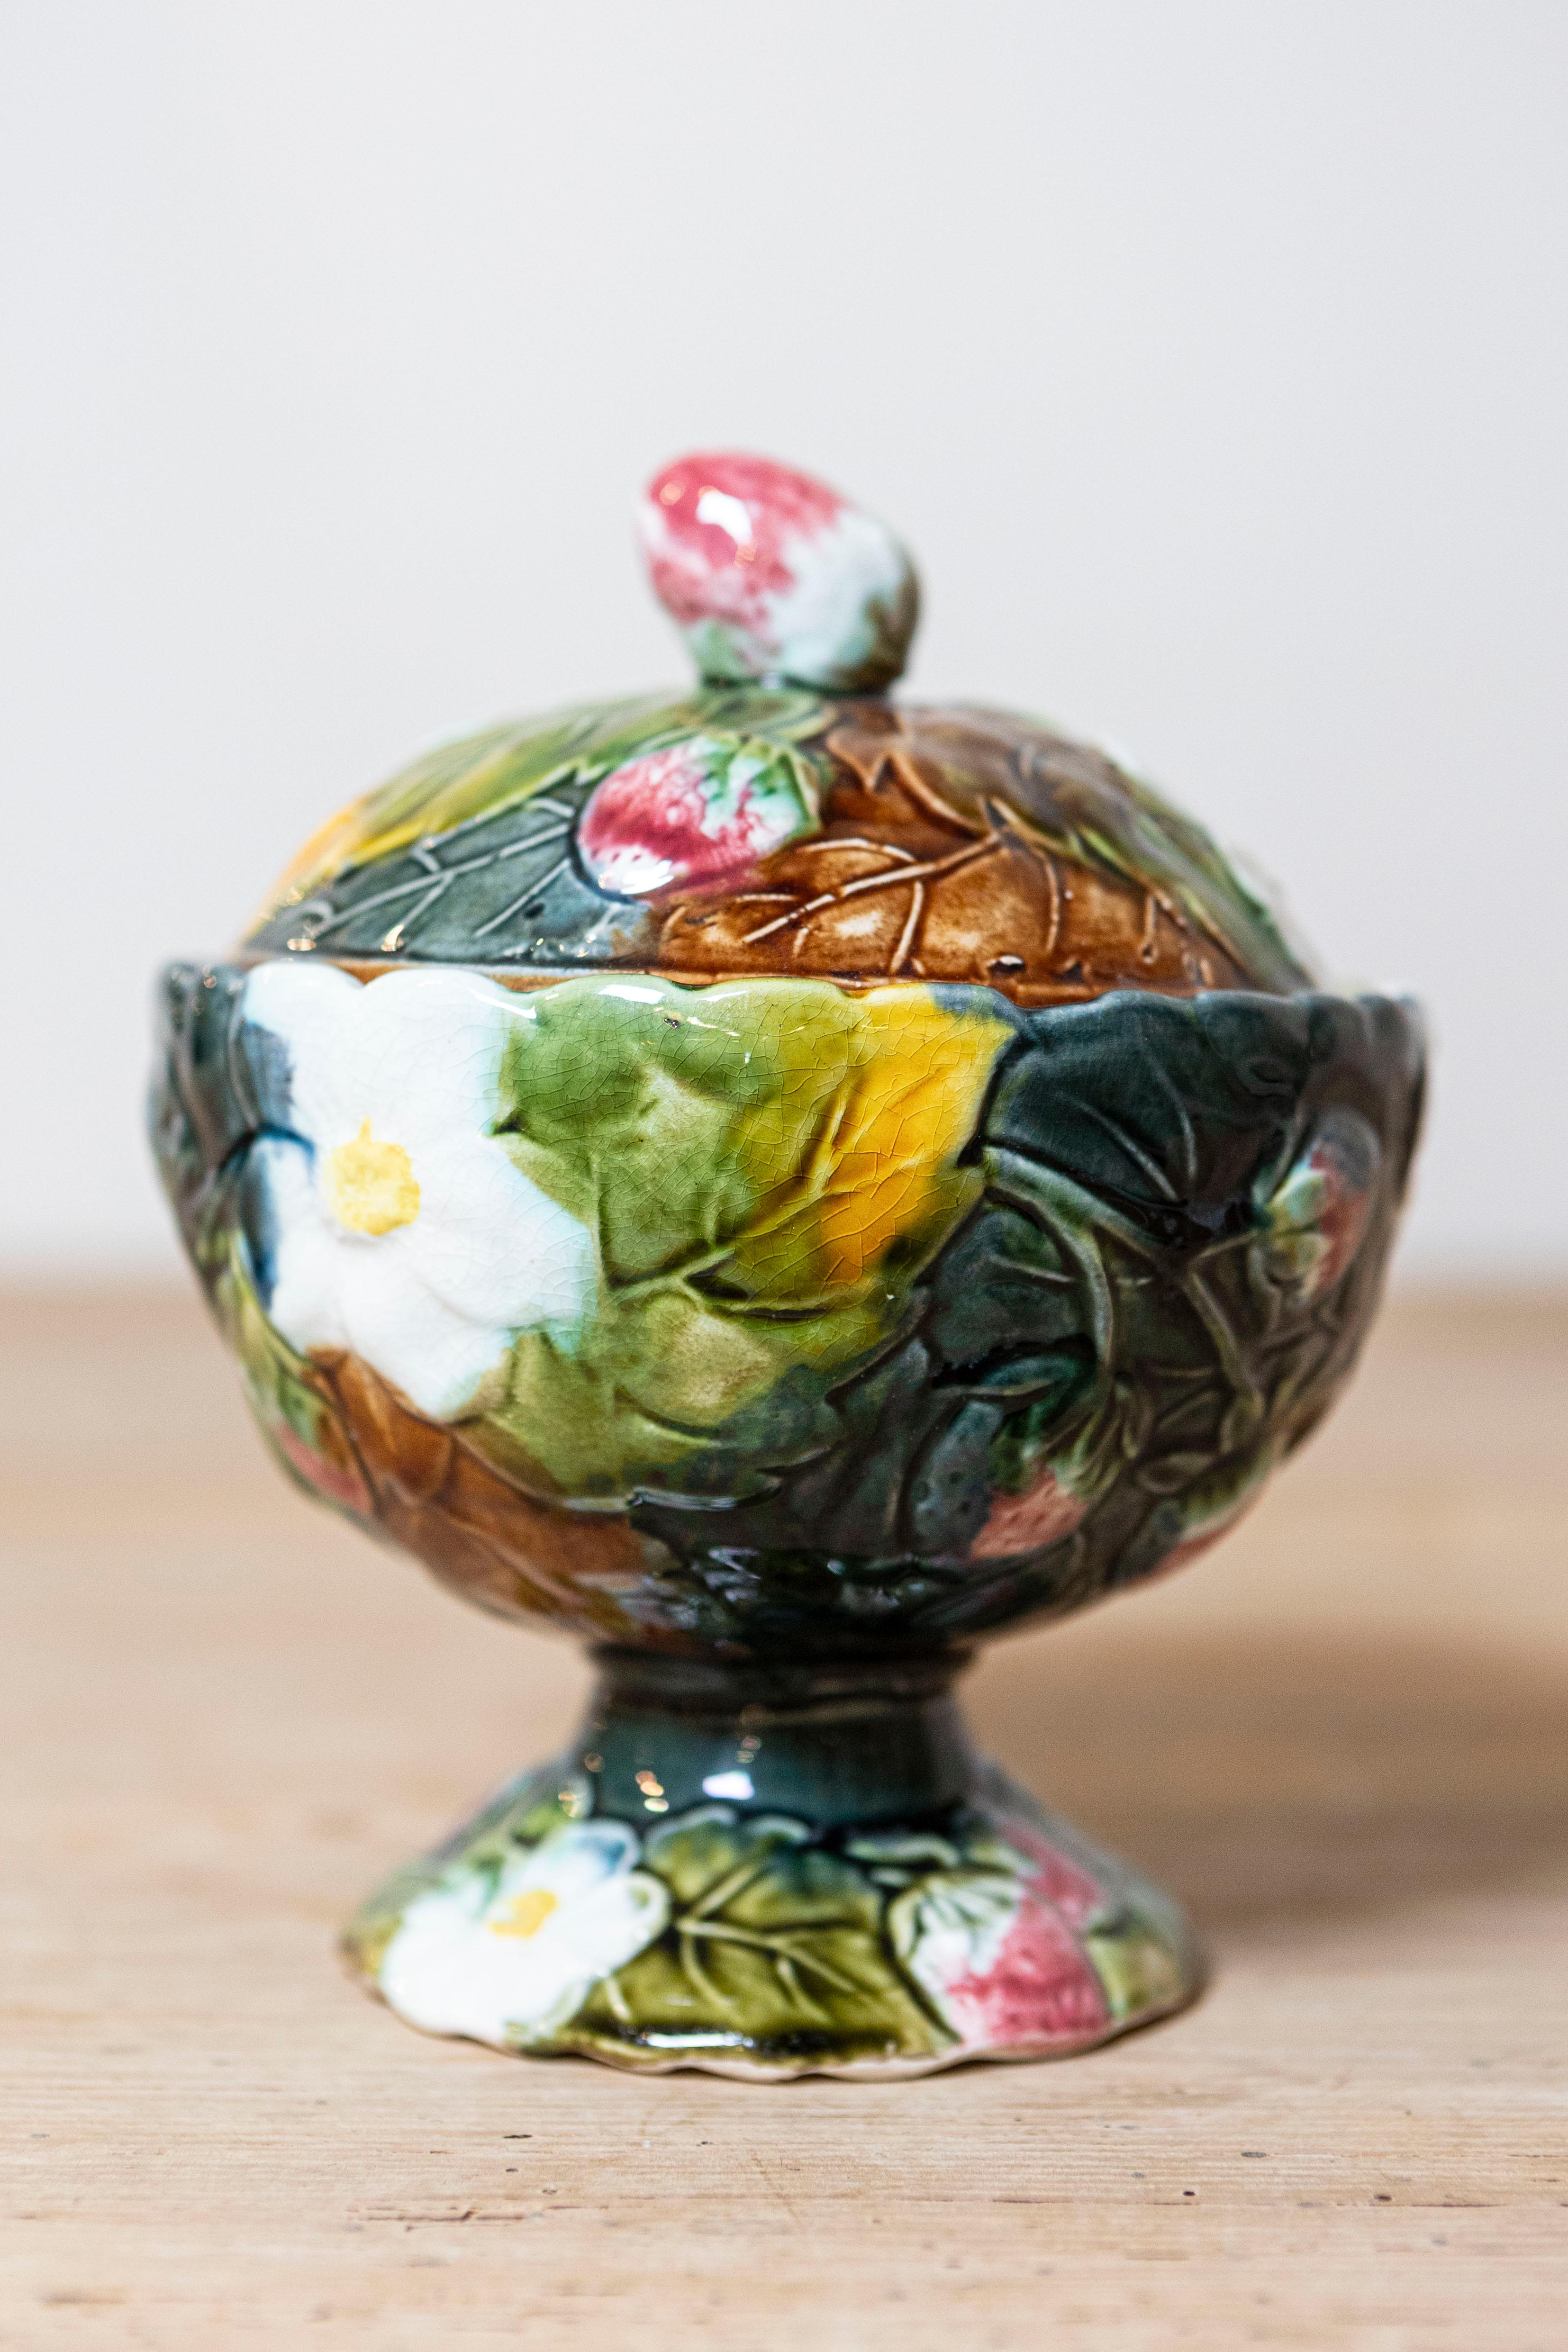 A French majolica lidded bowl from the 19th century, with strawberry motif, white flowers and foliage. Created in France during the 19th century, this bowl features a circular lid accented with a strawberry-themed handle and adorned with delicate